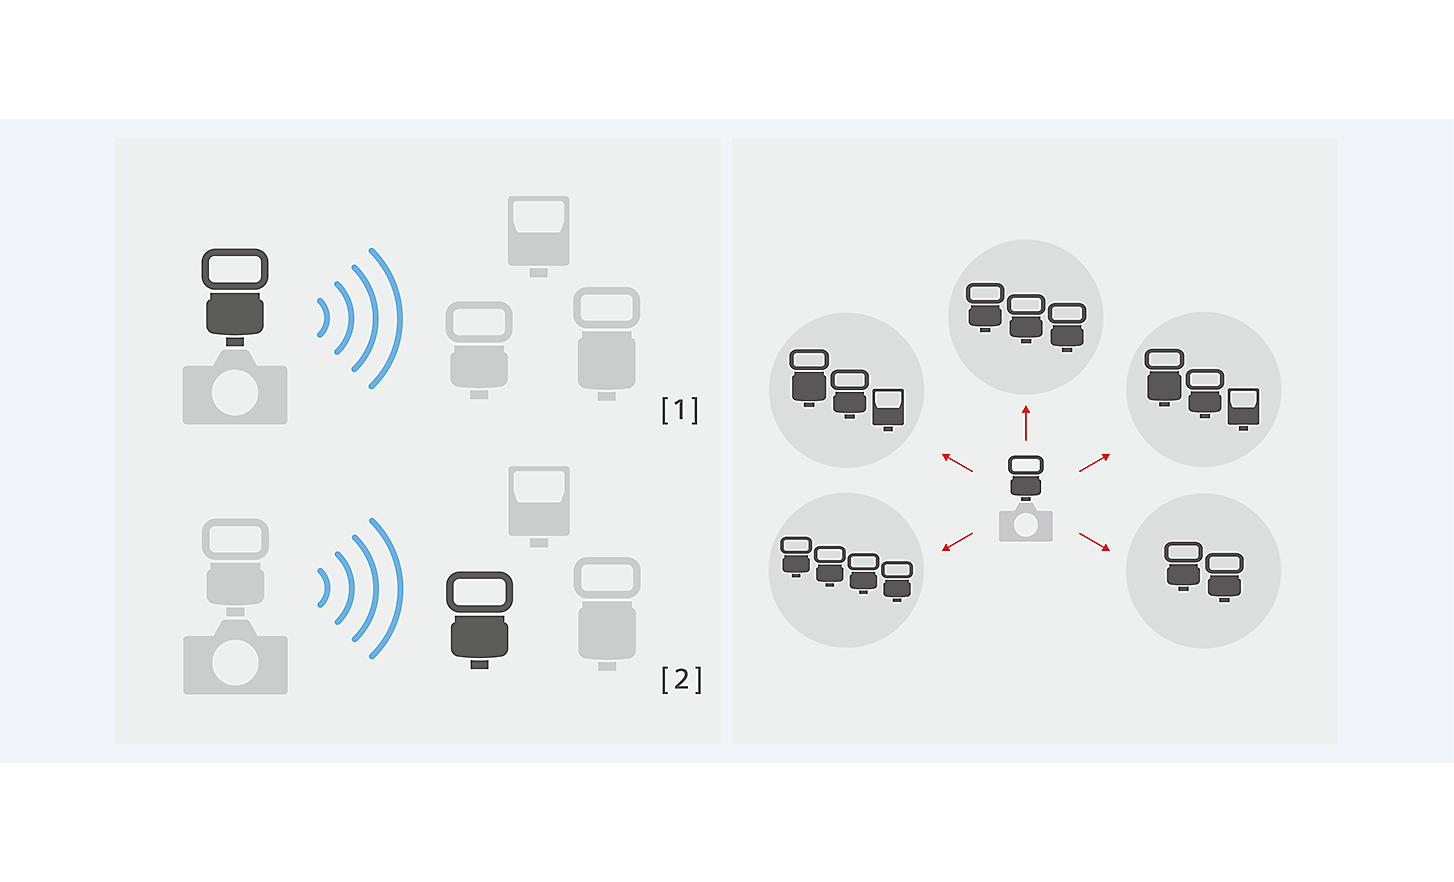 Illustration showing up to 15 flash units in 5 groups can be controlled via wireless radio communication